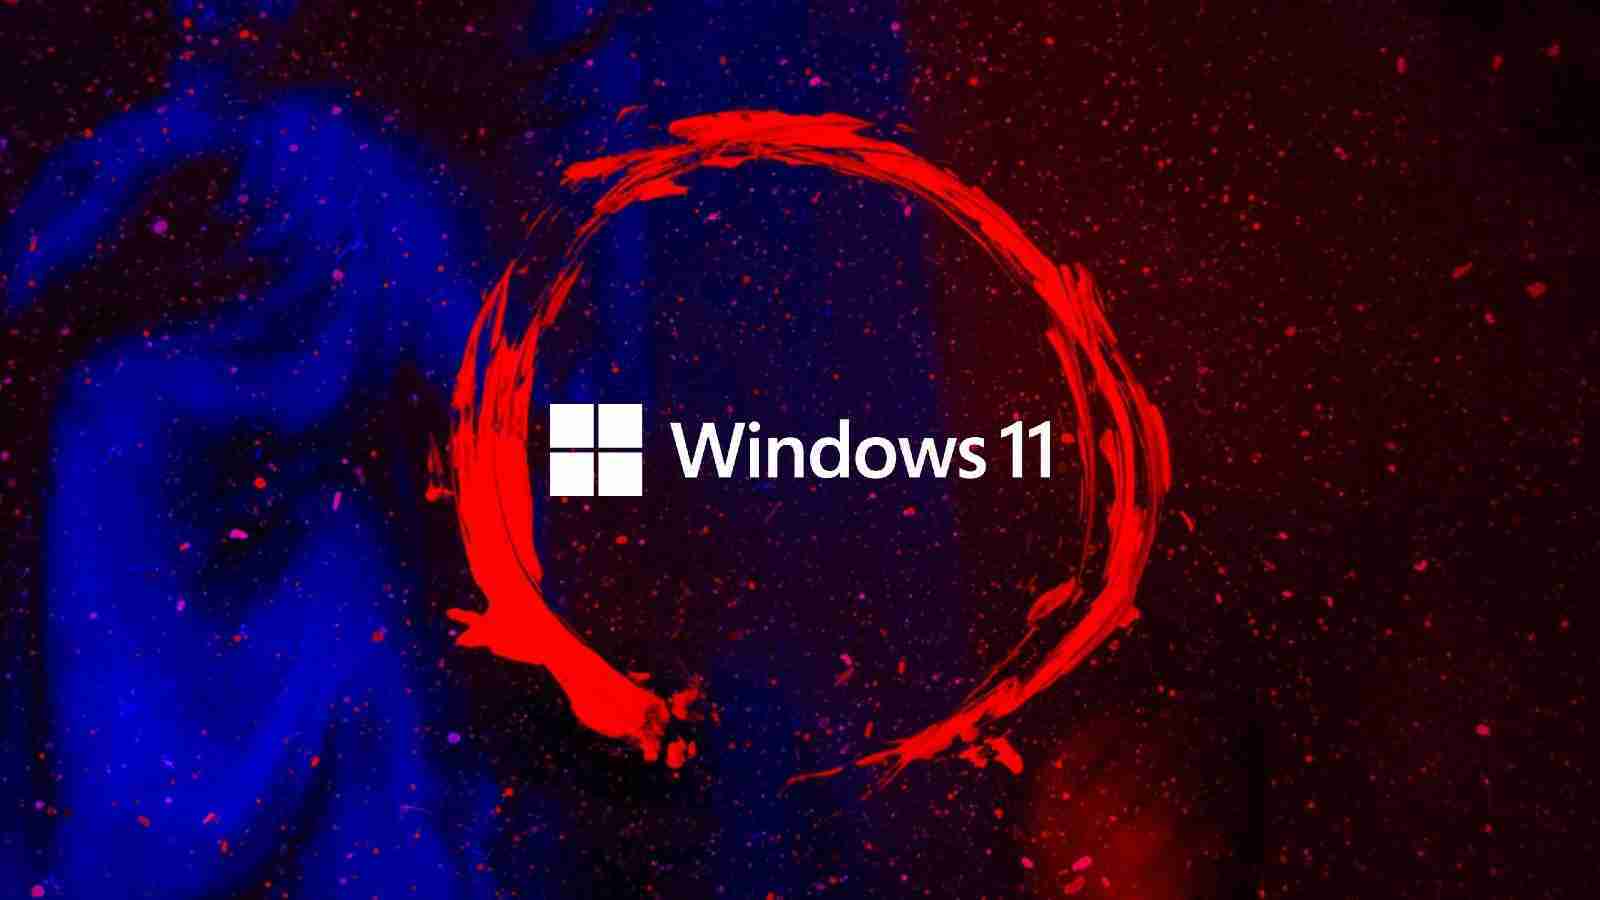 Unofficial Windows 11 Upgrade Installs Info-stealing Malware - Privacy ...